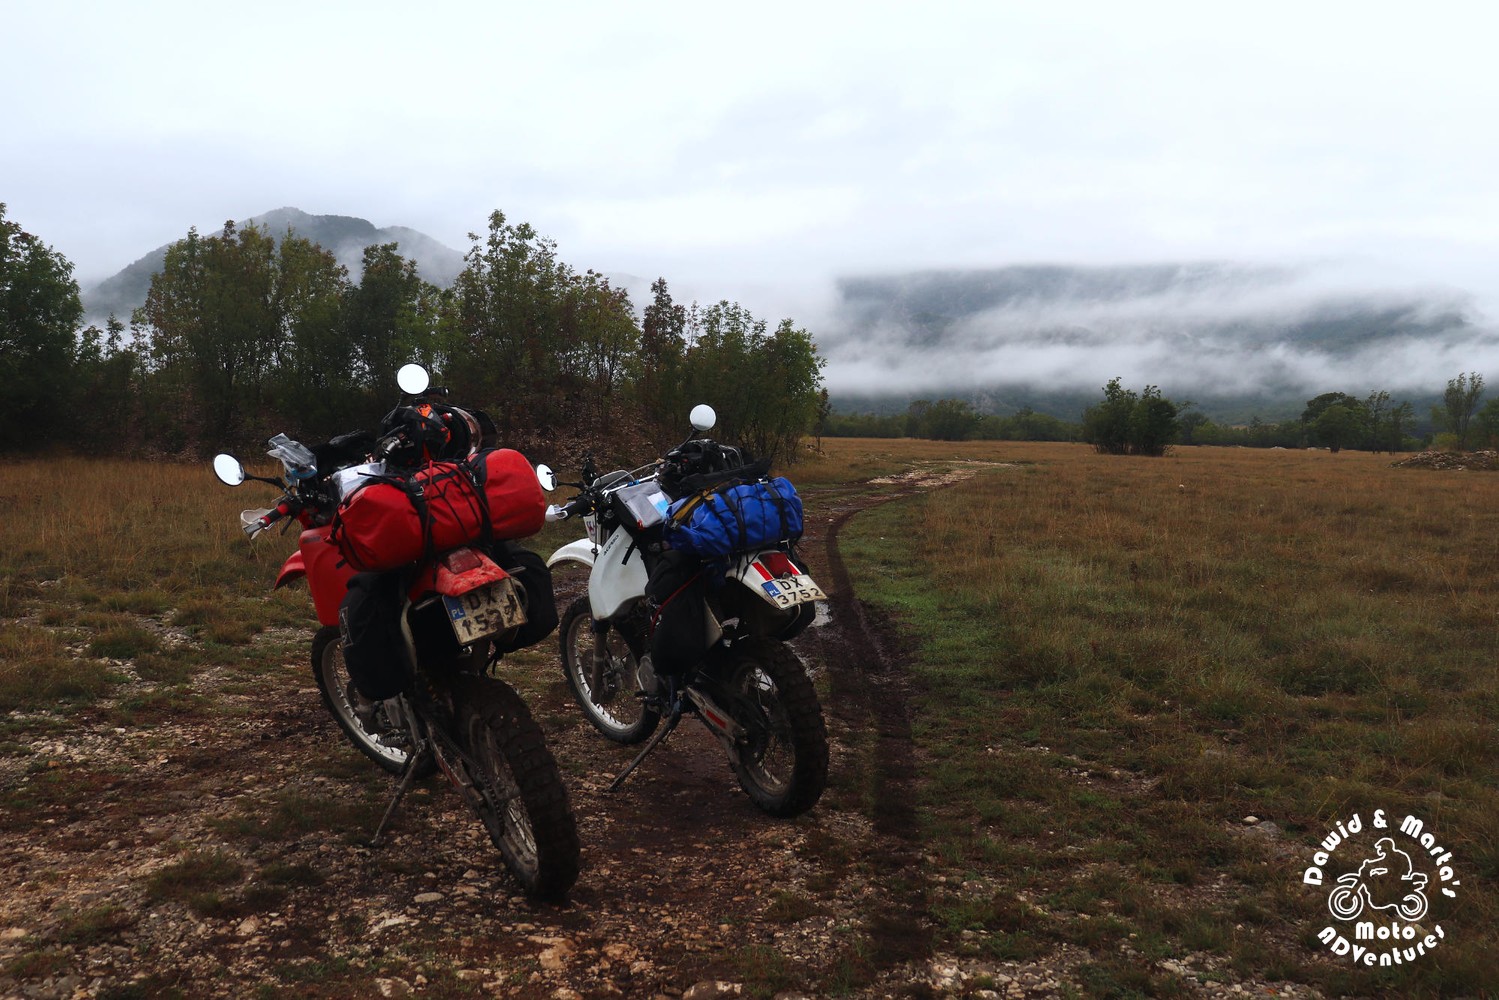 XR400 and DR350 in Montenegro near Orjen and Lovcen mountain ranges